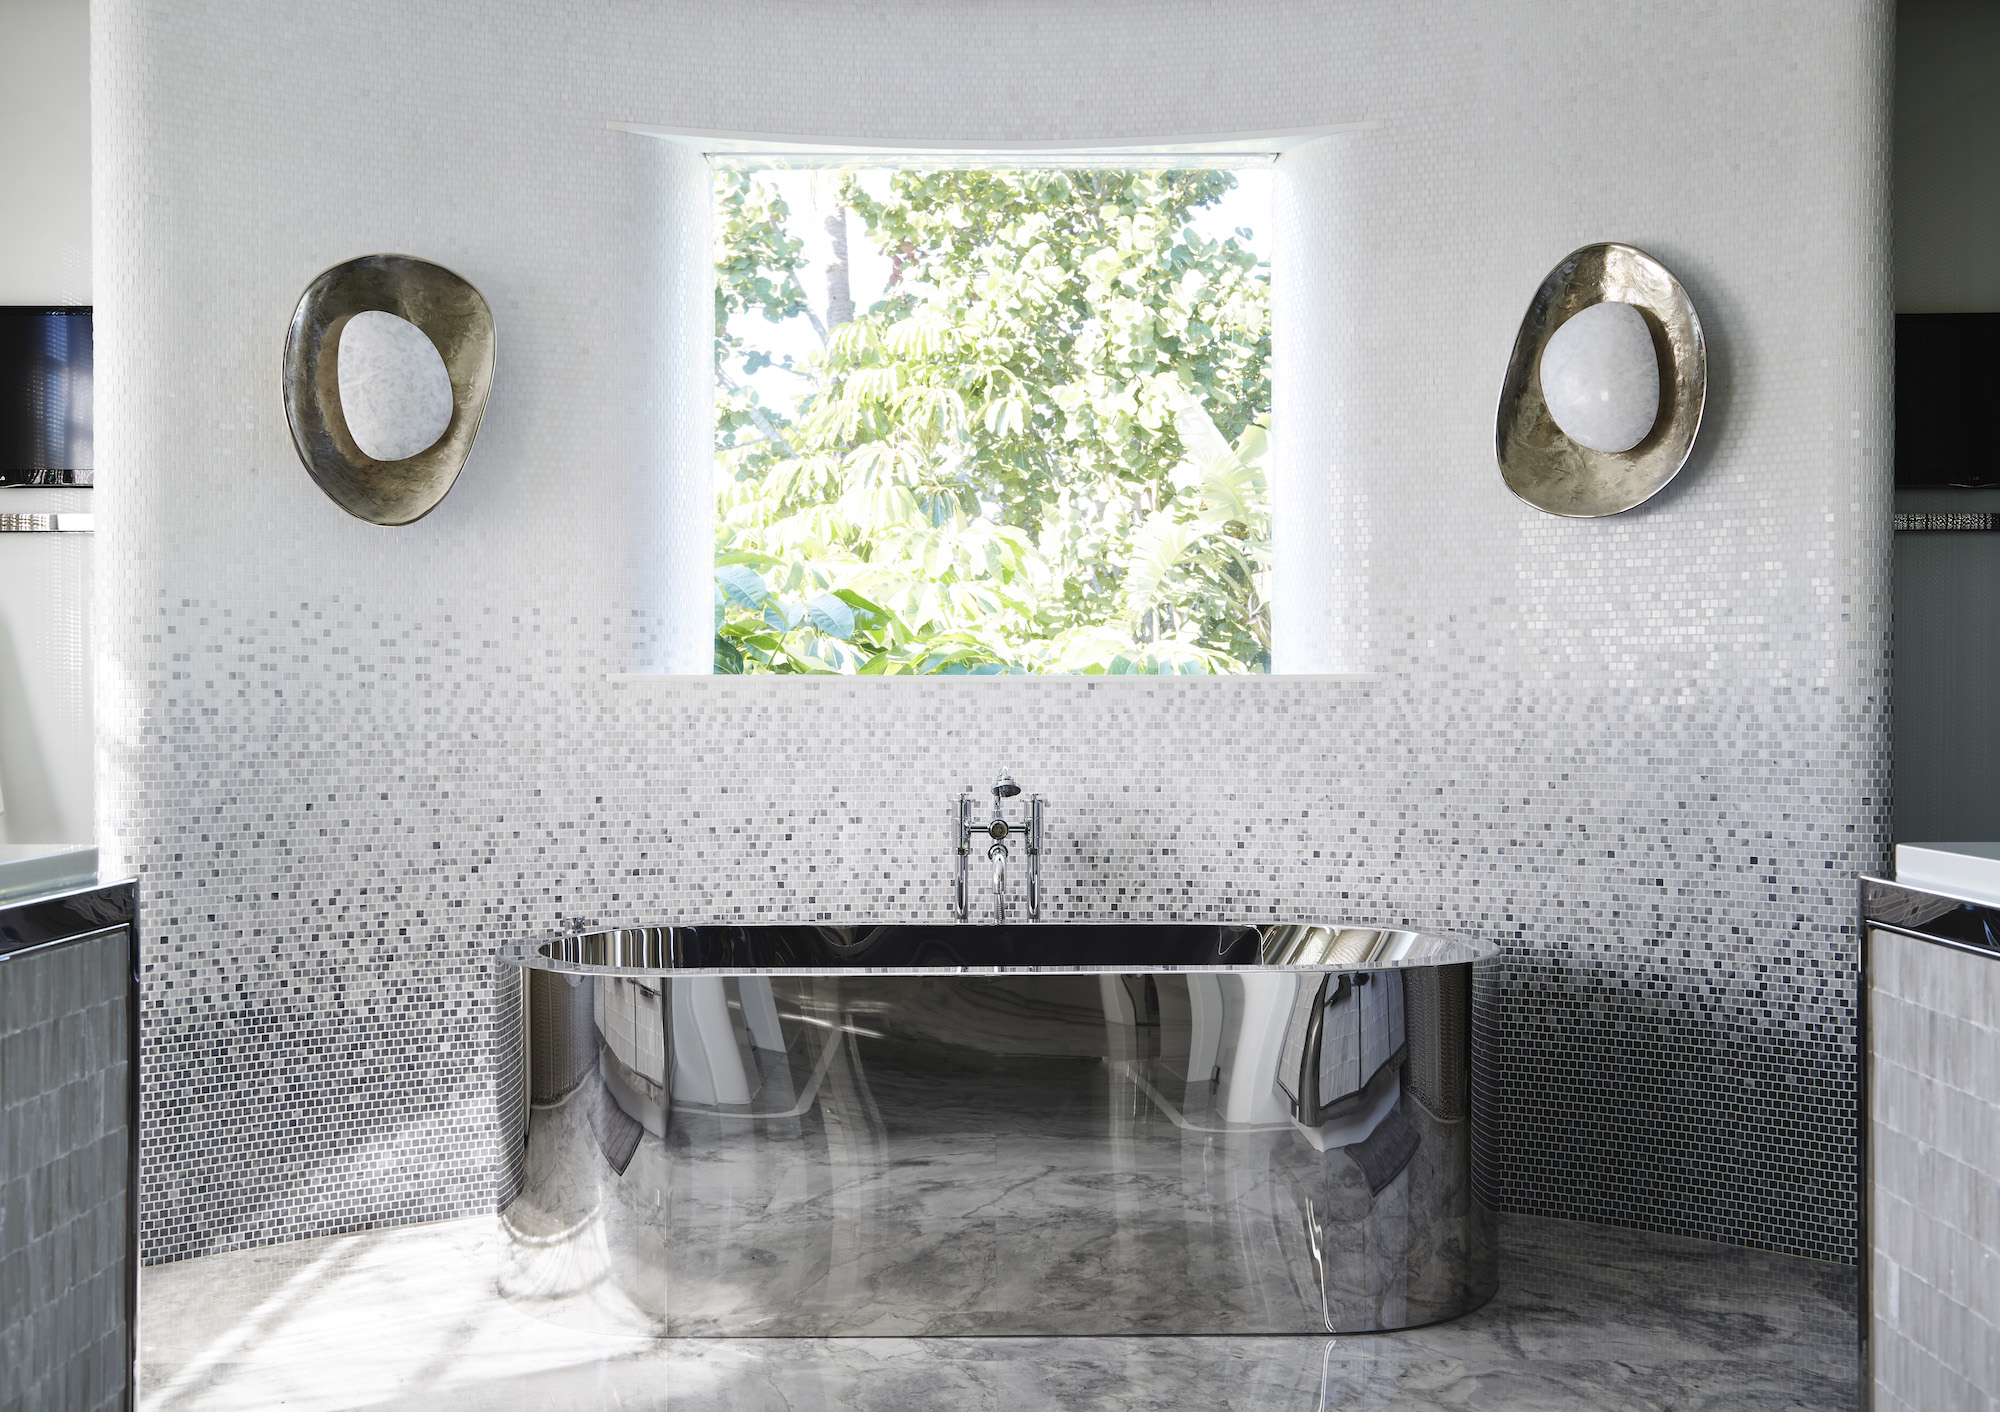 Palm Beach project by Pembrooke & Ives utilises sleek, glamorous polished steel, sculptural sconces and a rain-invoking mosaic - Effect Magazine